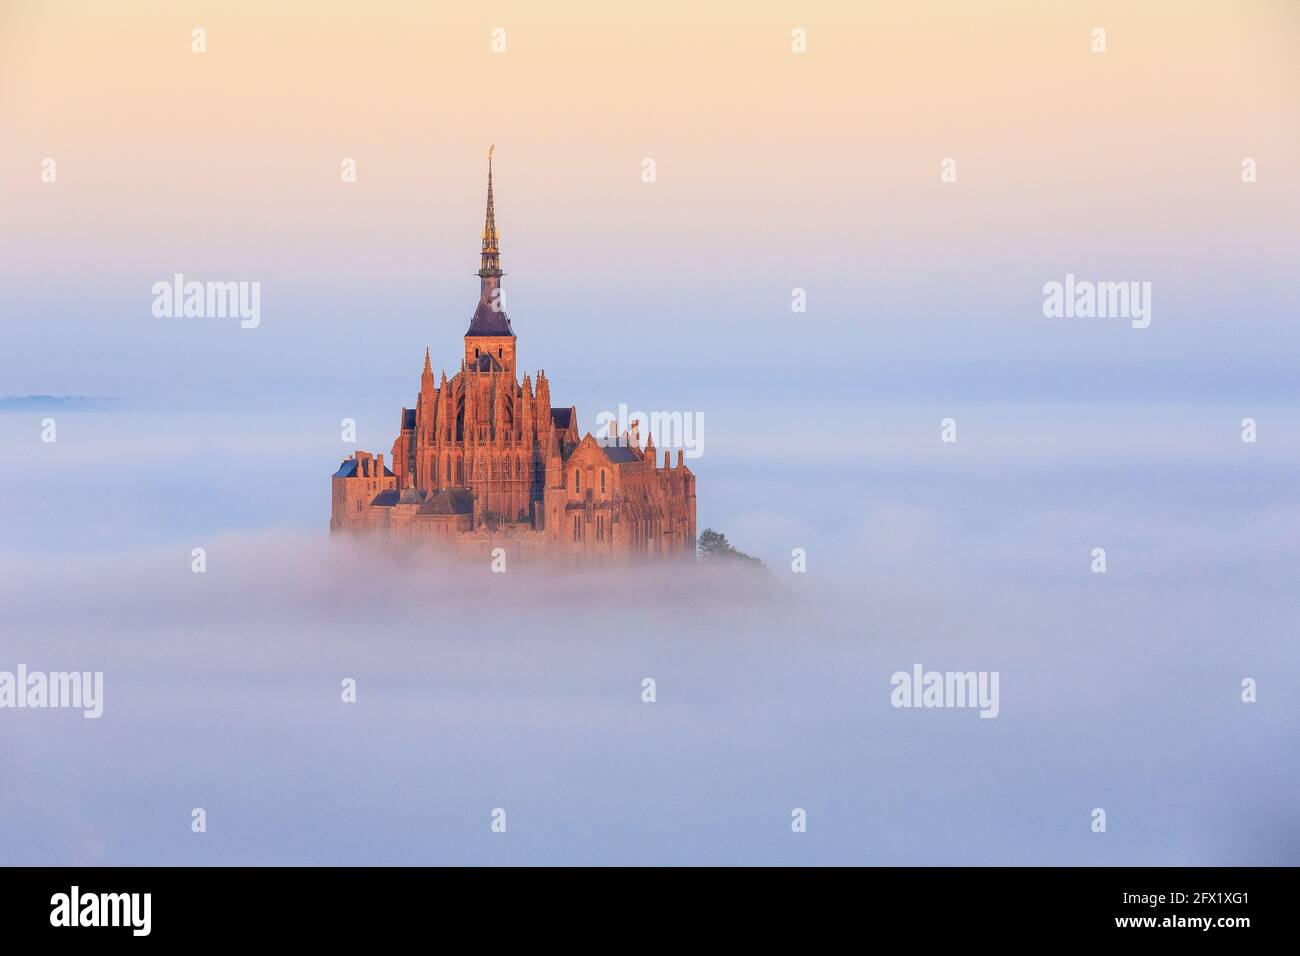 FRANCE. NORMANDY. MANCHE (50) AERIAL VIEW OF MONT SAINT MICHEL ABBEY IN THE MORNING MIST Stock Photo